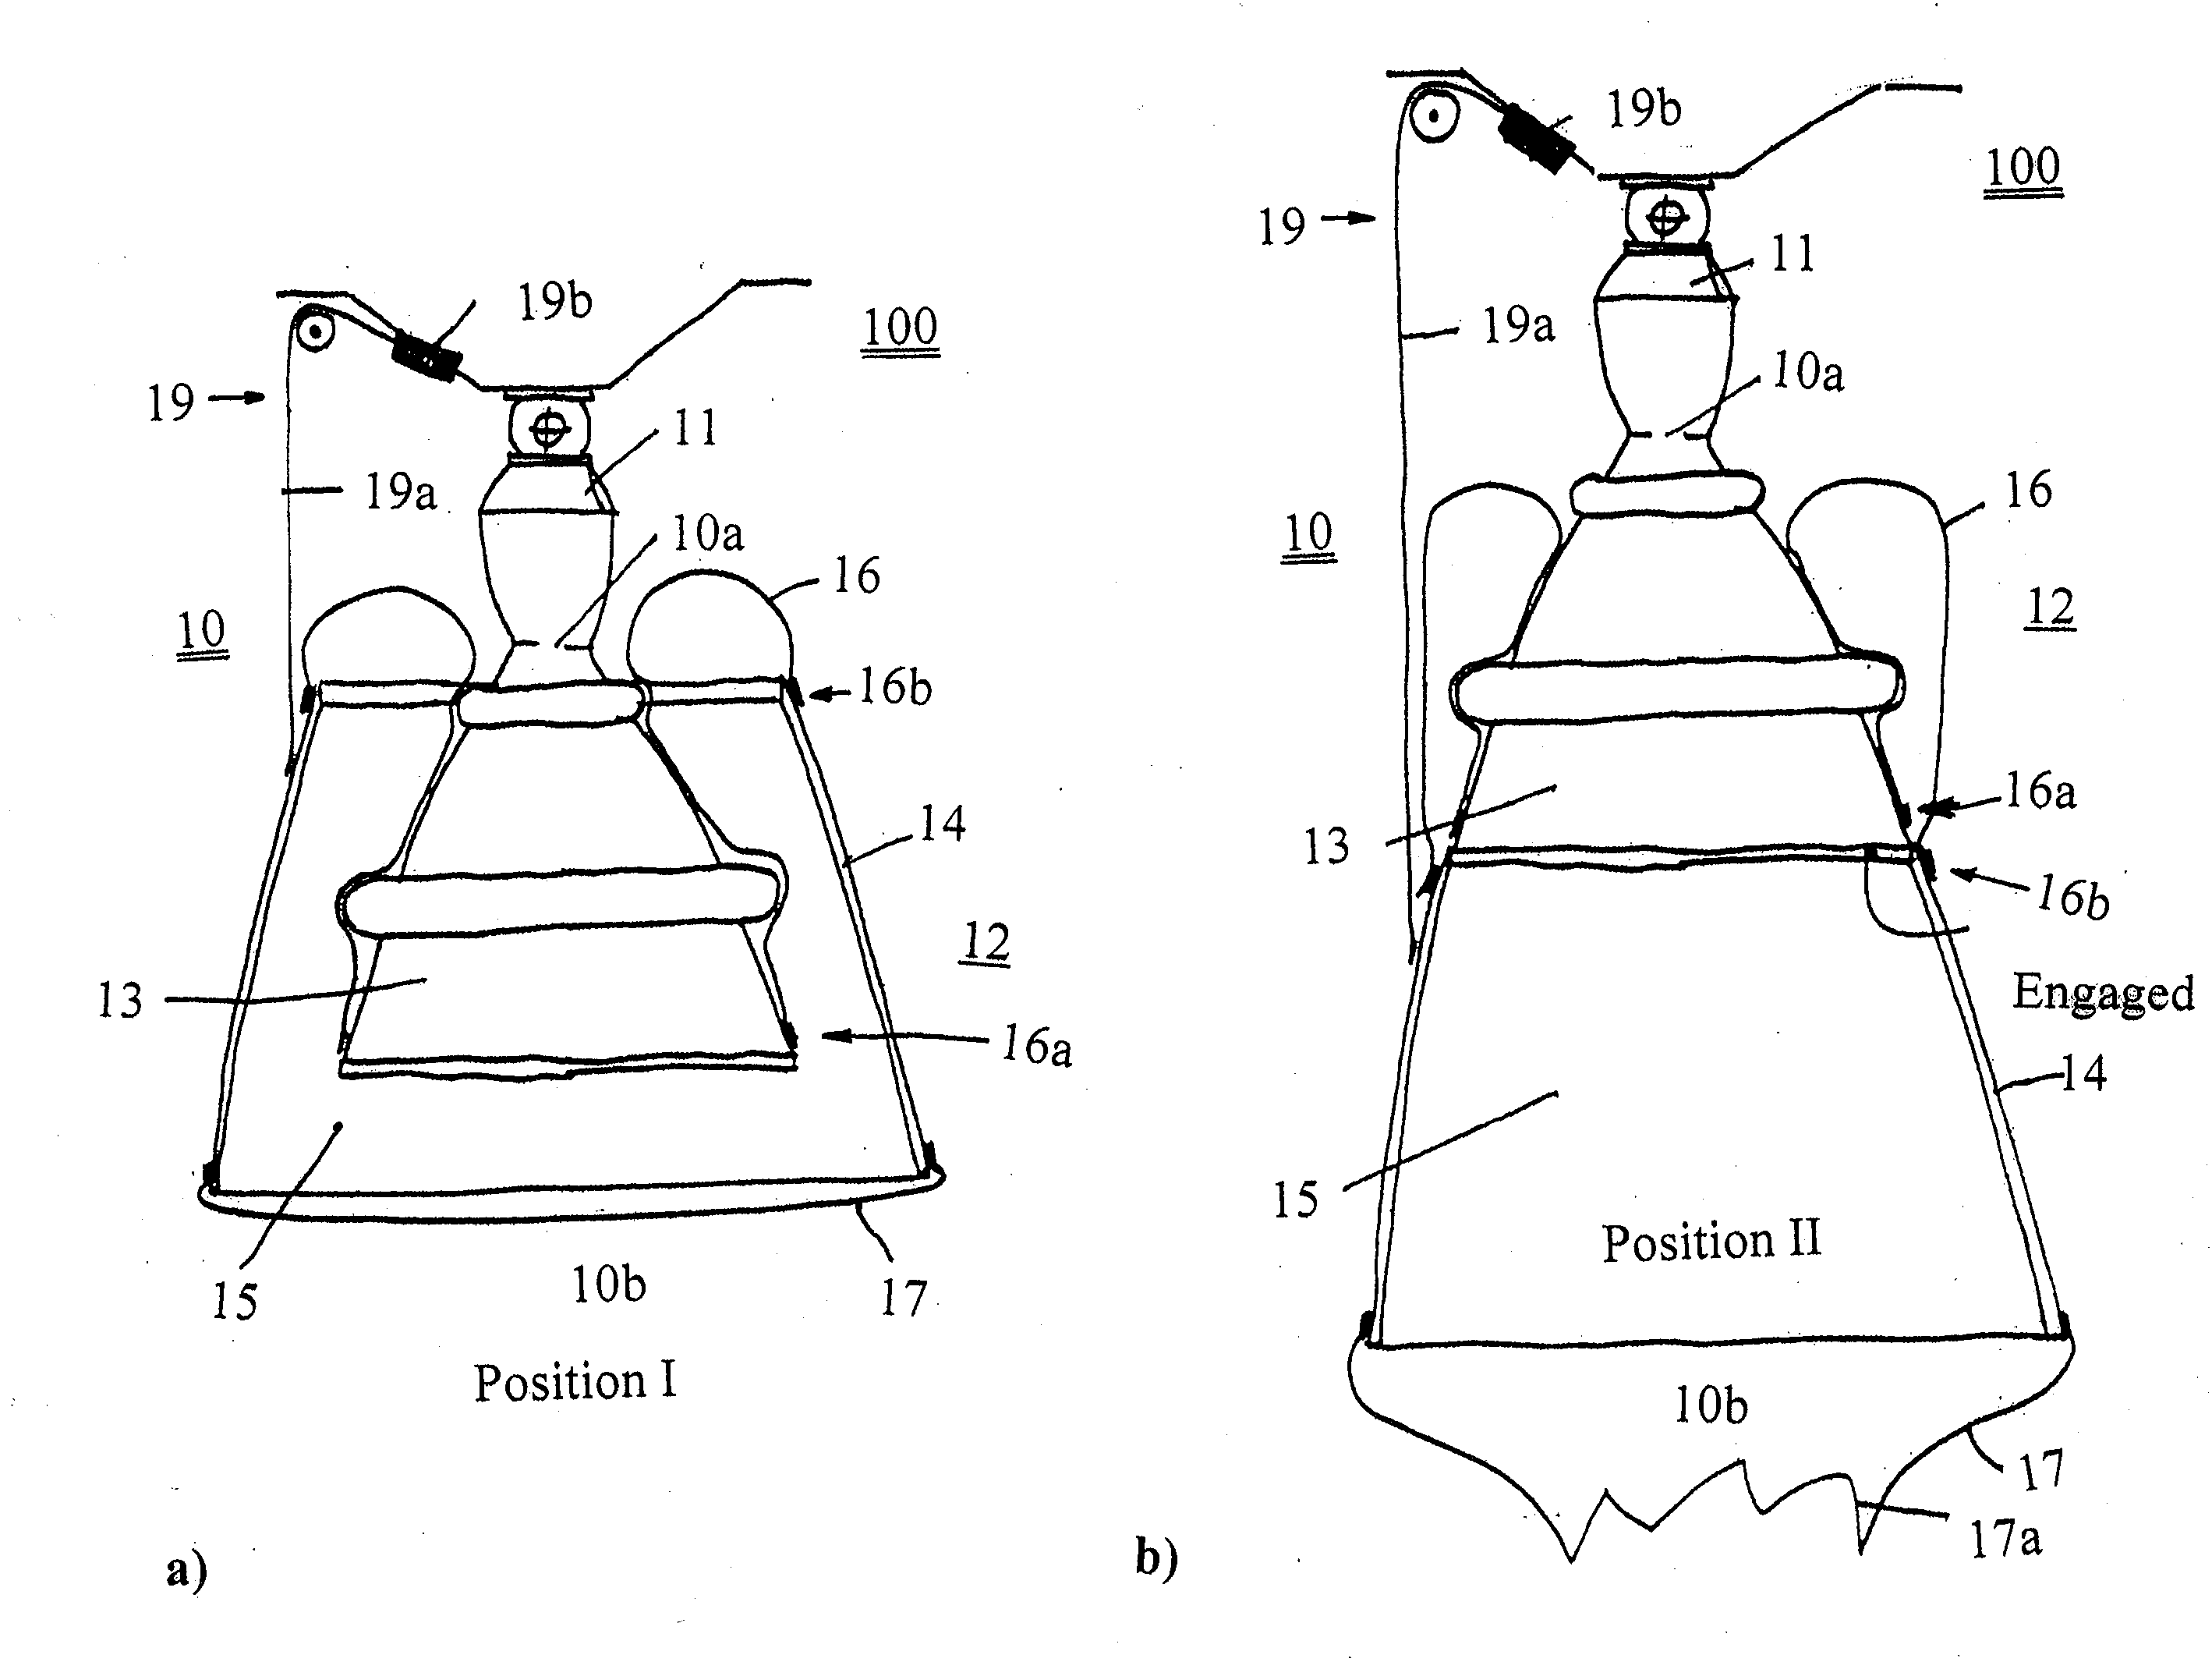 Extendible exhaust nozzle bell for a rocket engine